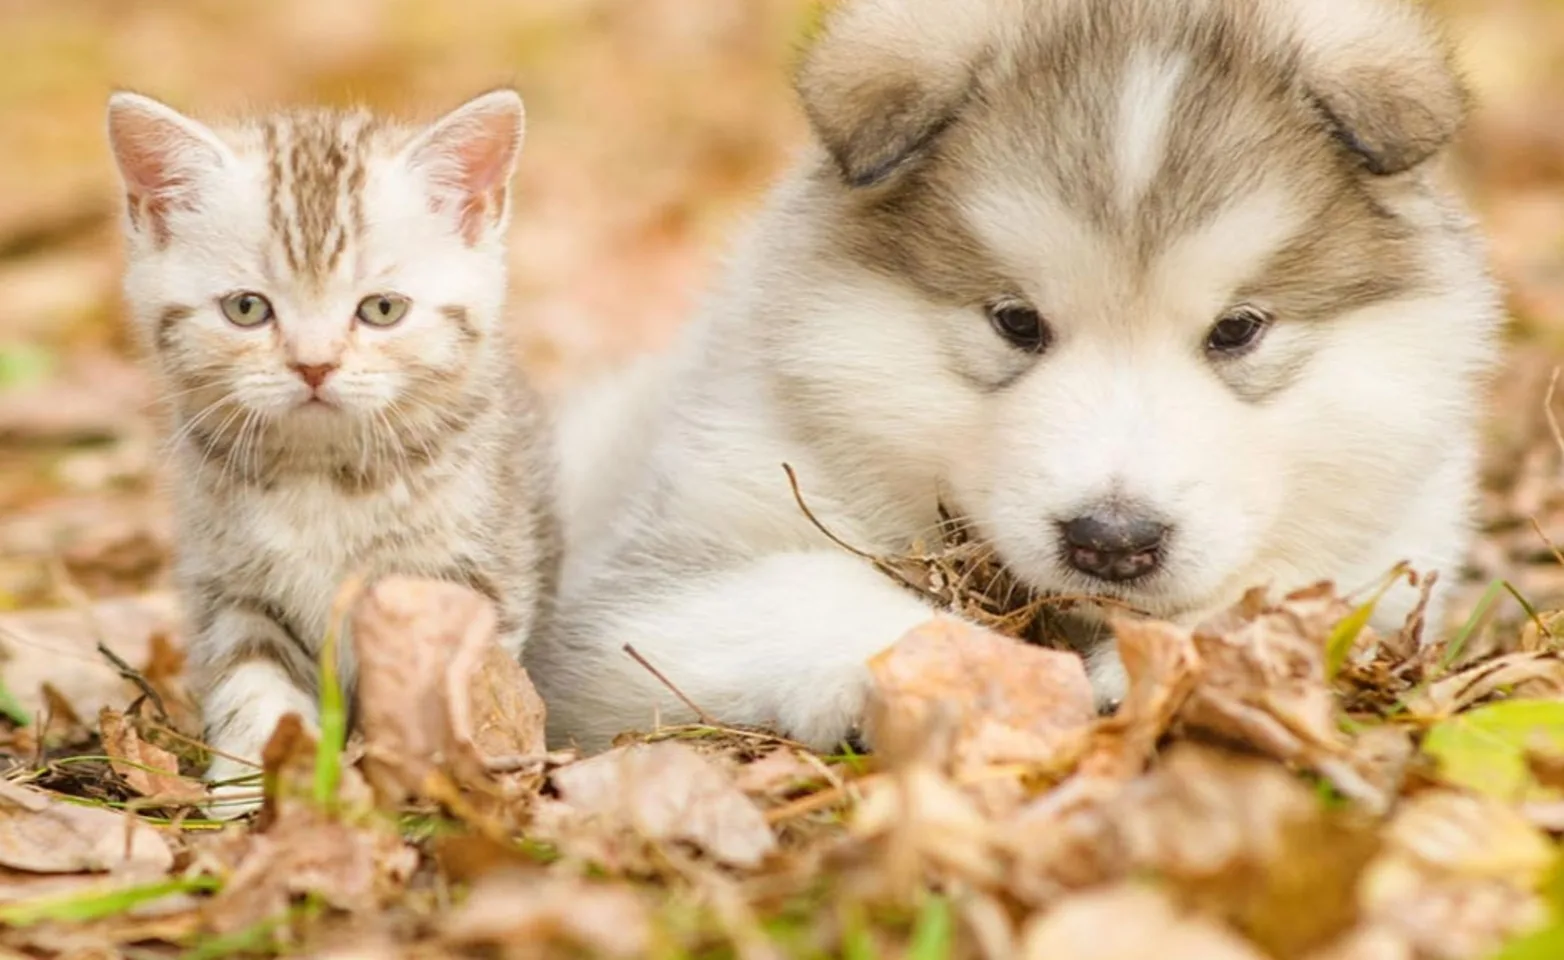 A cat and a dog laying next to each other in a pile of leaves 